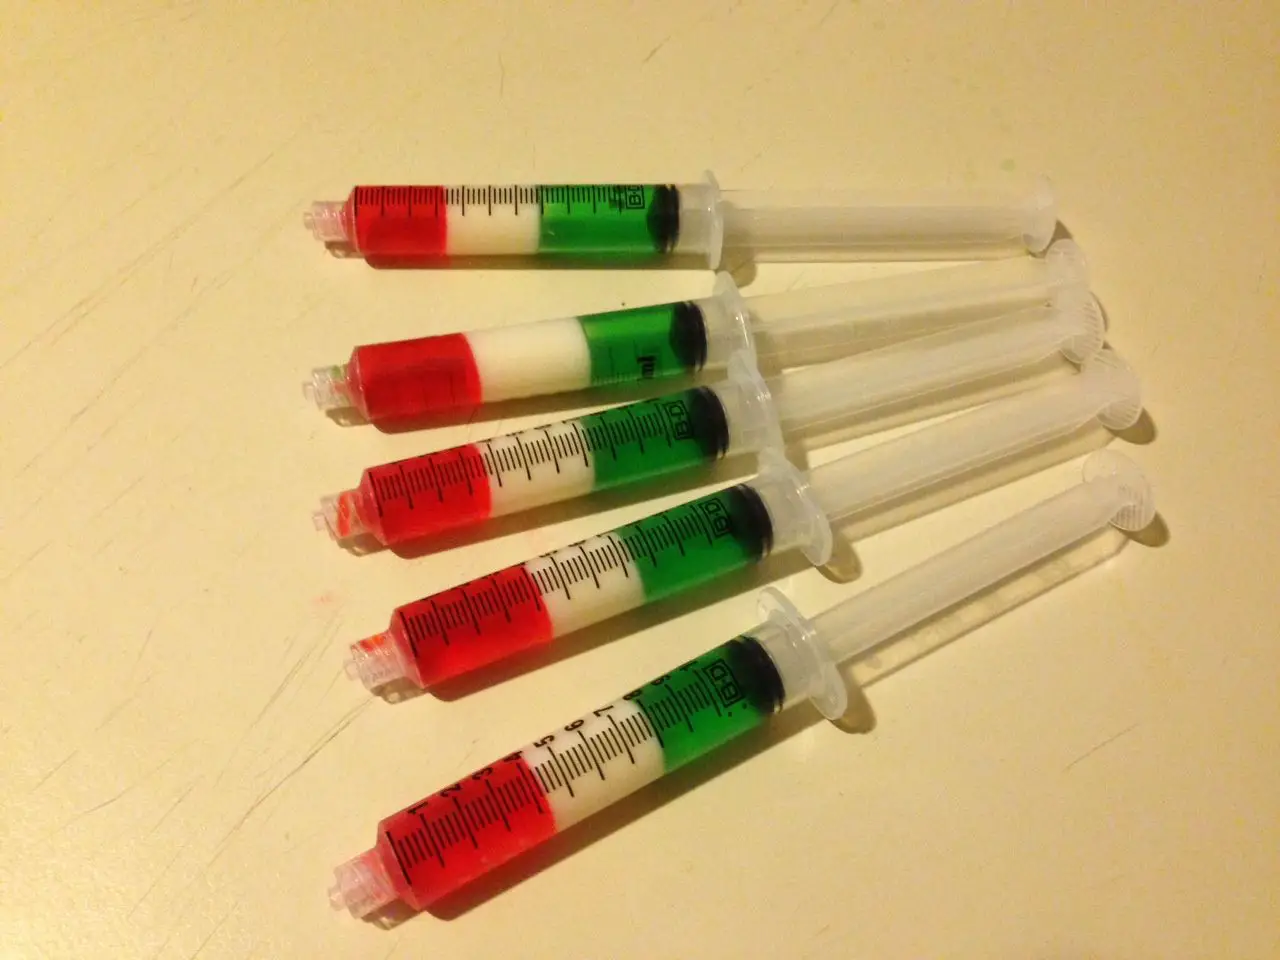 How To Make Jello Shots In Syringes